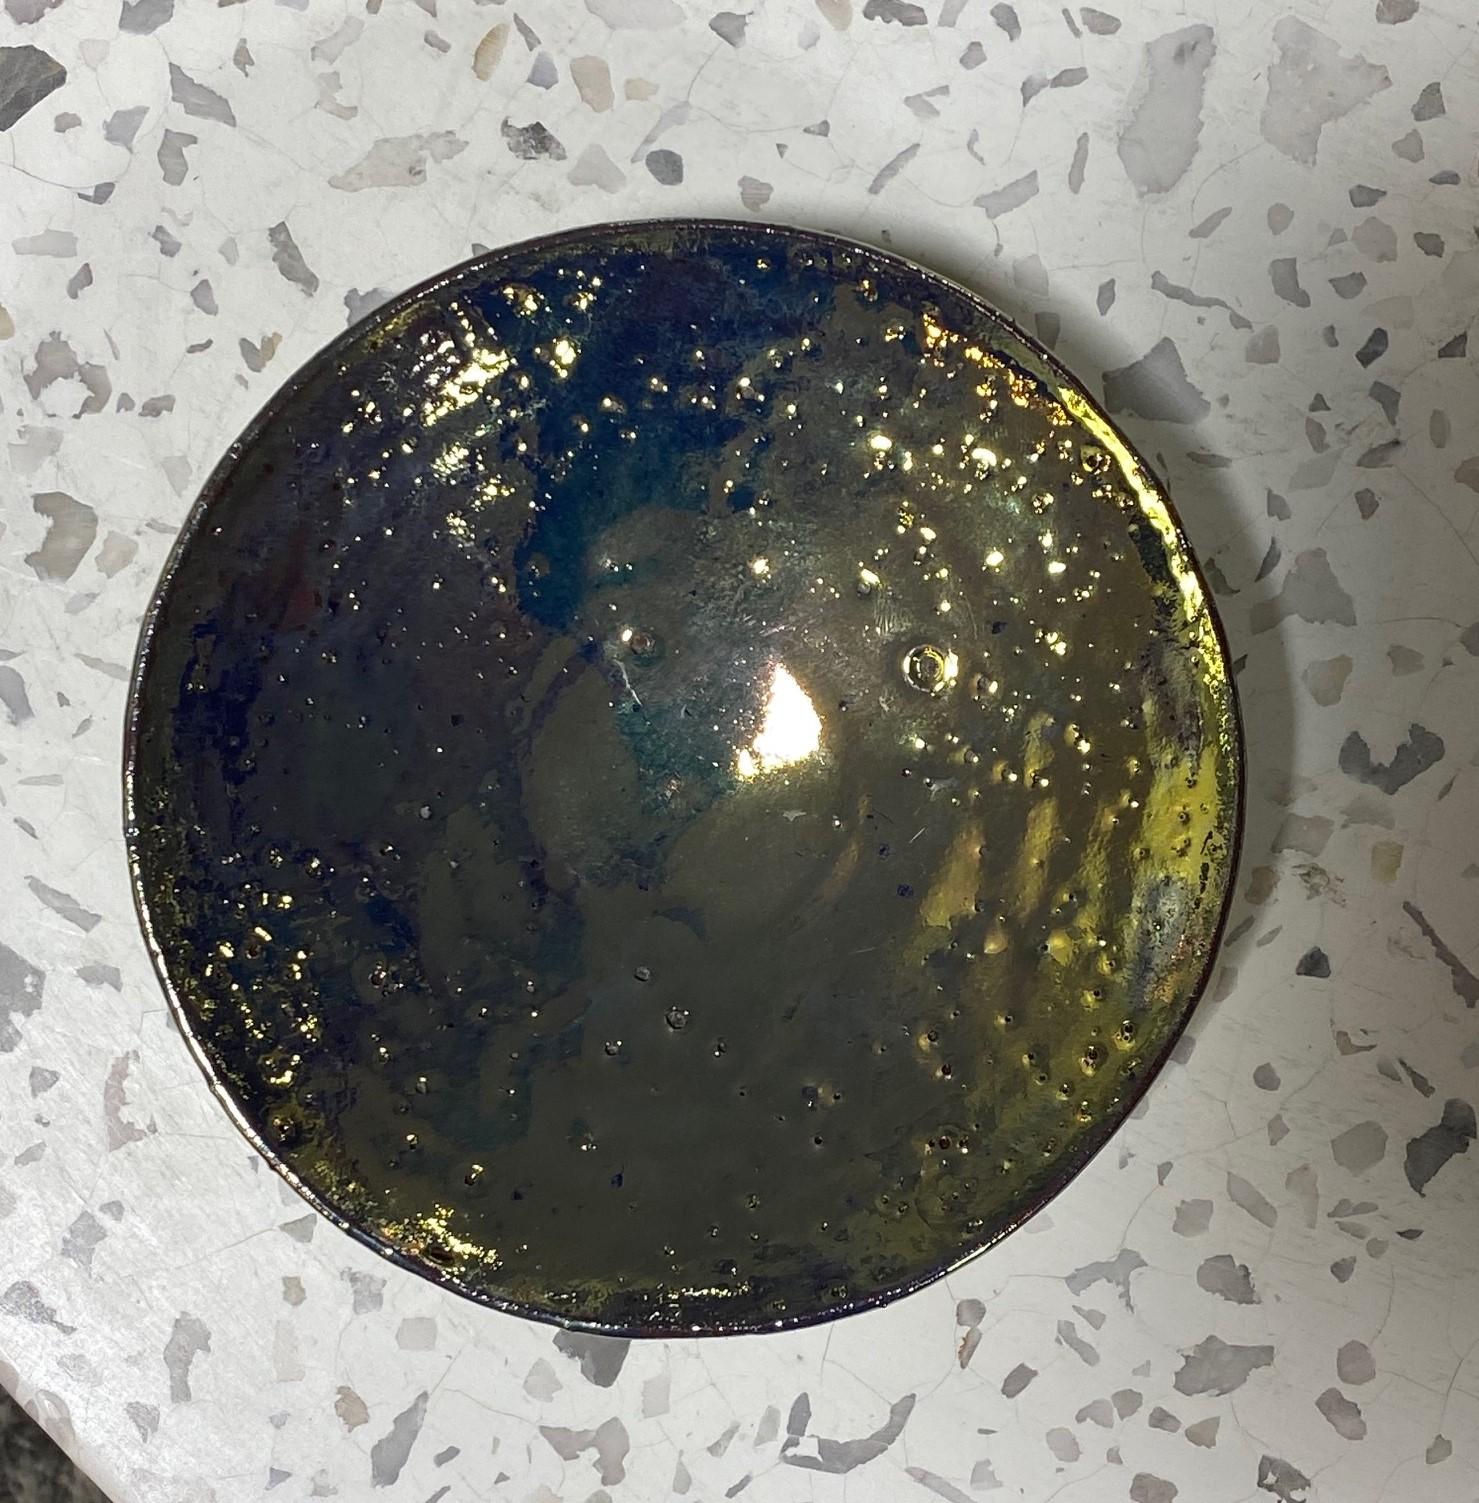 Glazed Beatrice Wood Signed Volcanic Iridescent Gold Luster Studio Pottery Bowl Plate